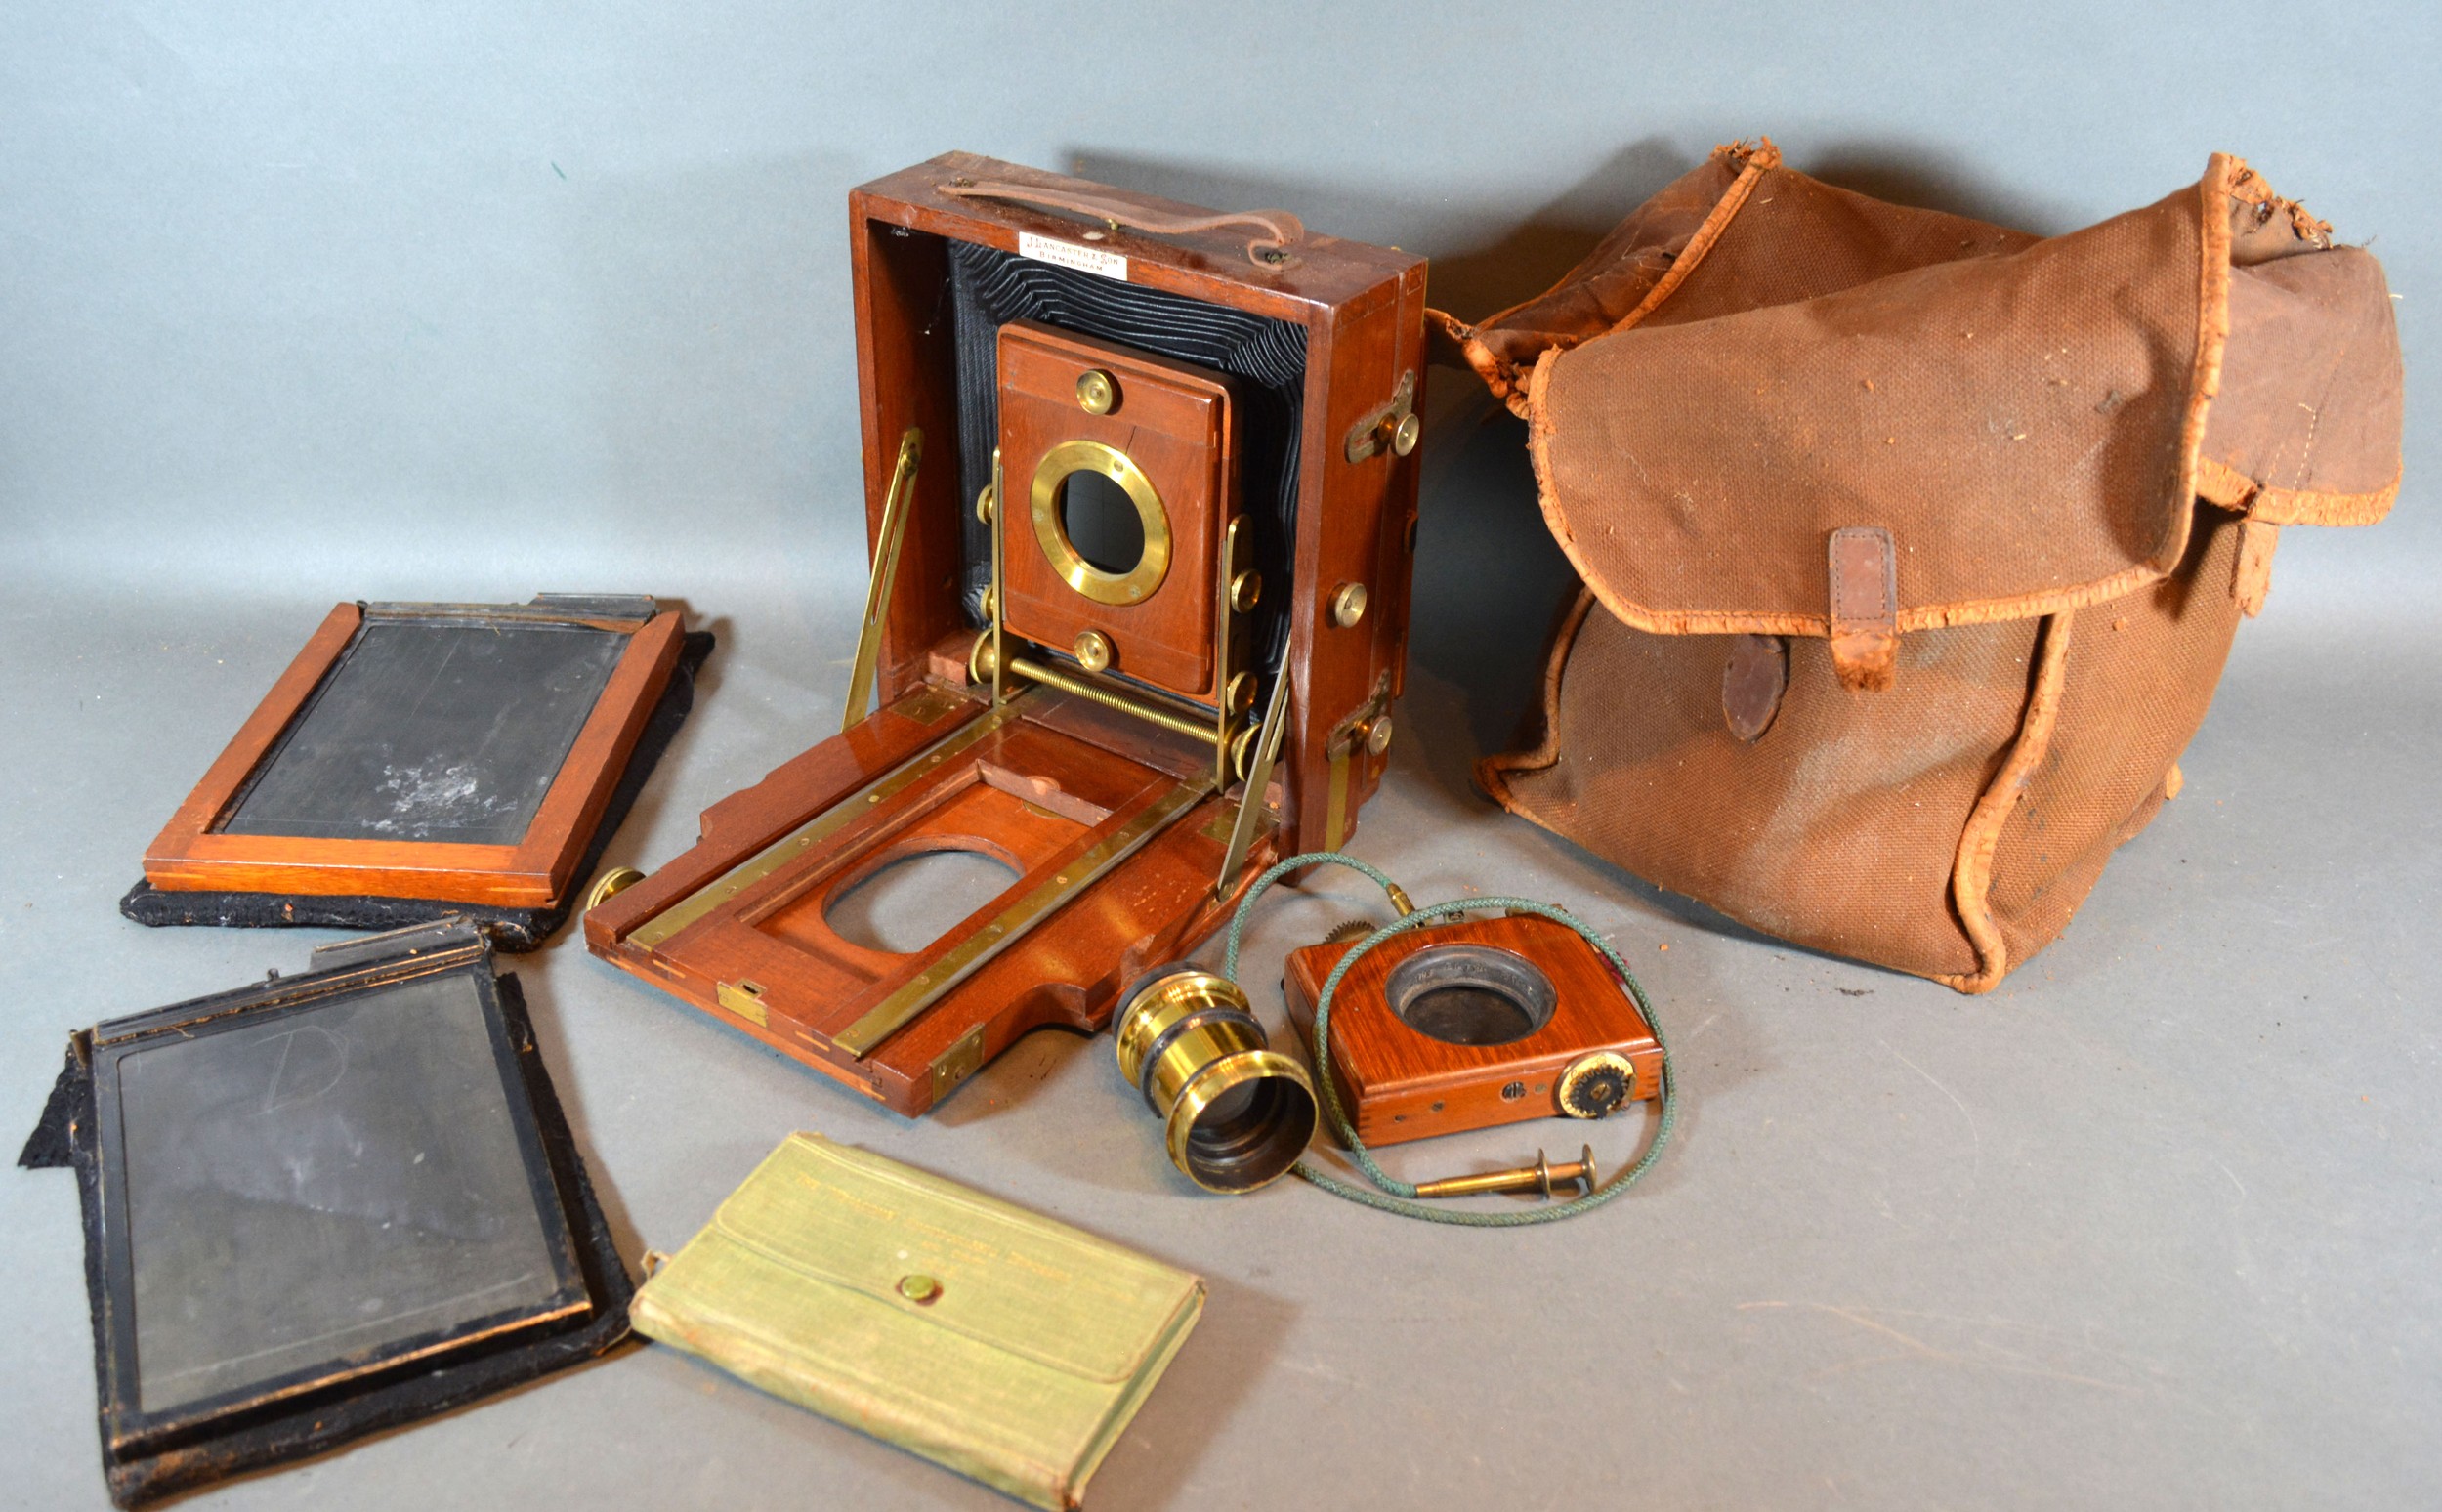 The 1896 Instantograph Patent Plate Camera by J. Lancaster & Son Birmingham with plates and